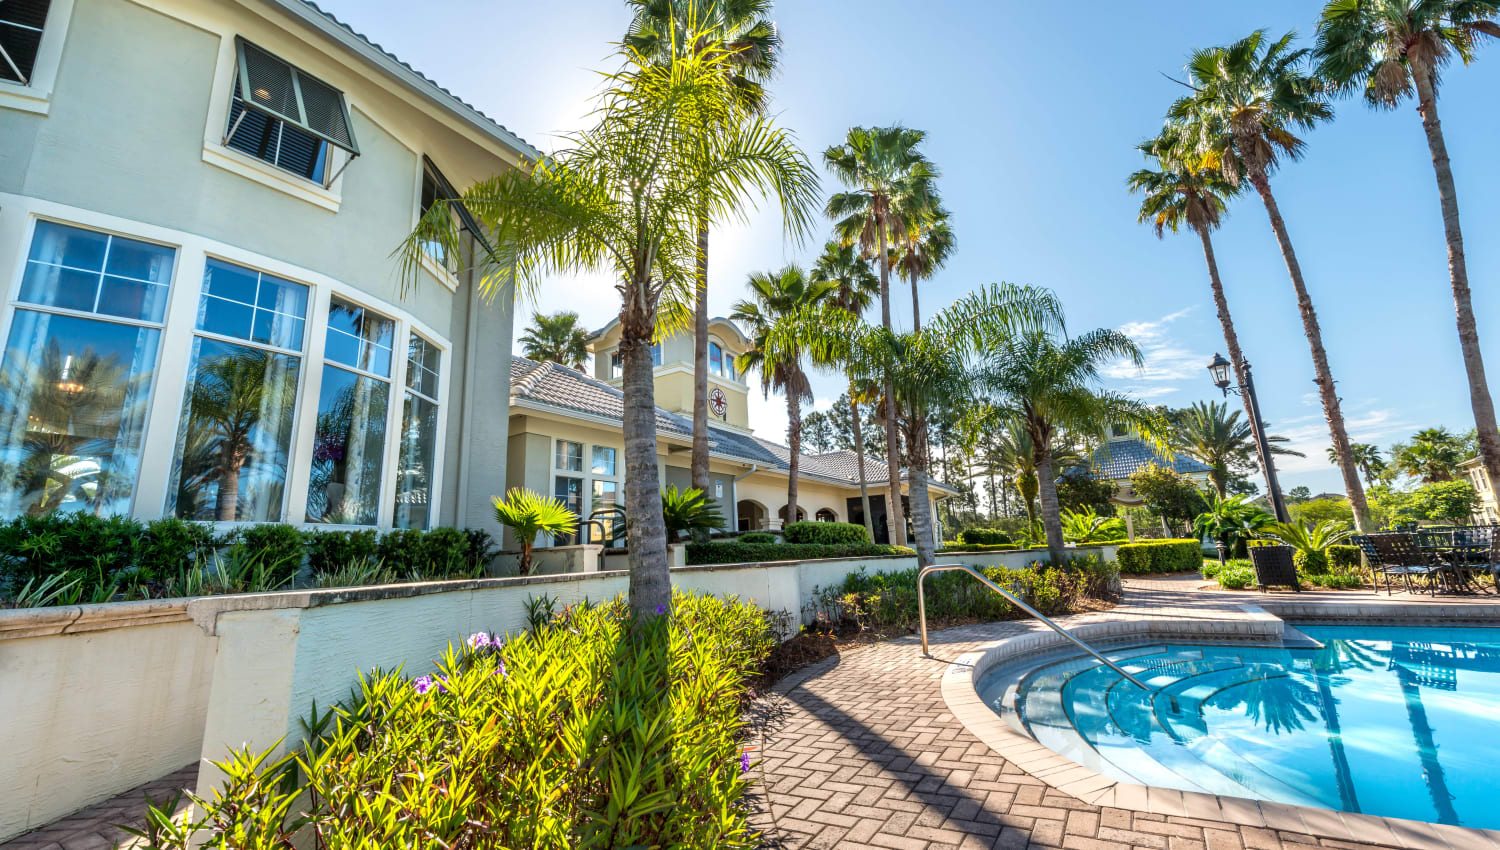 Palm trees surrounding the pool at Cape House in Jacksonville, Florida